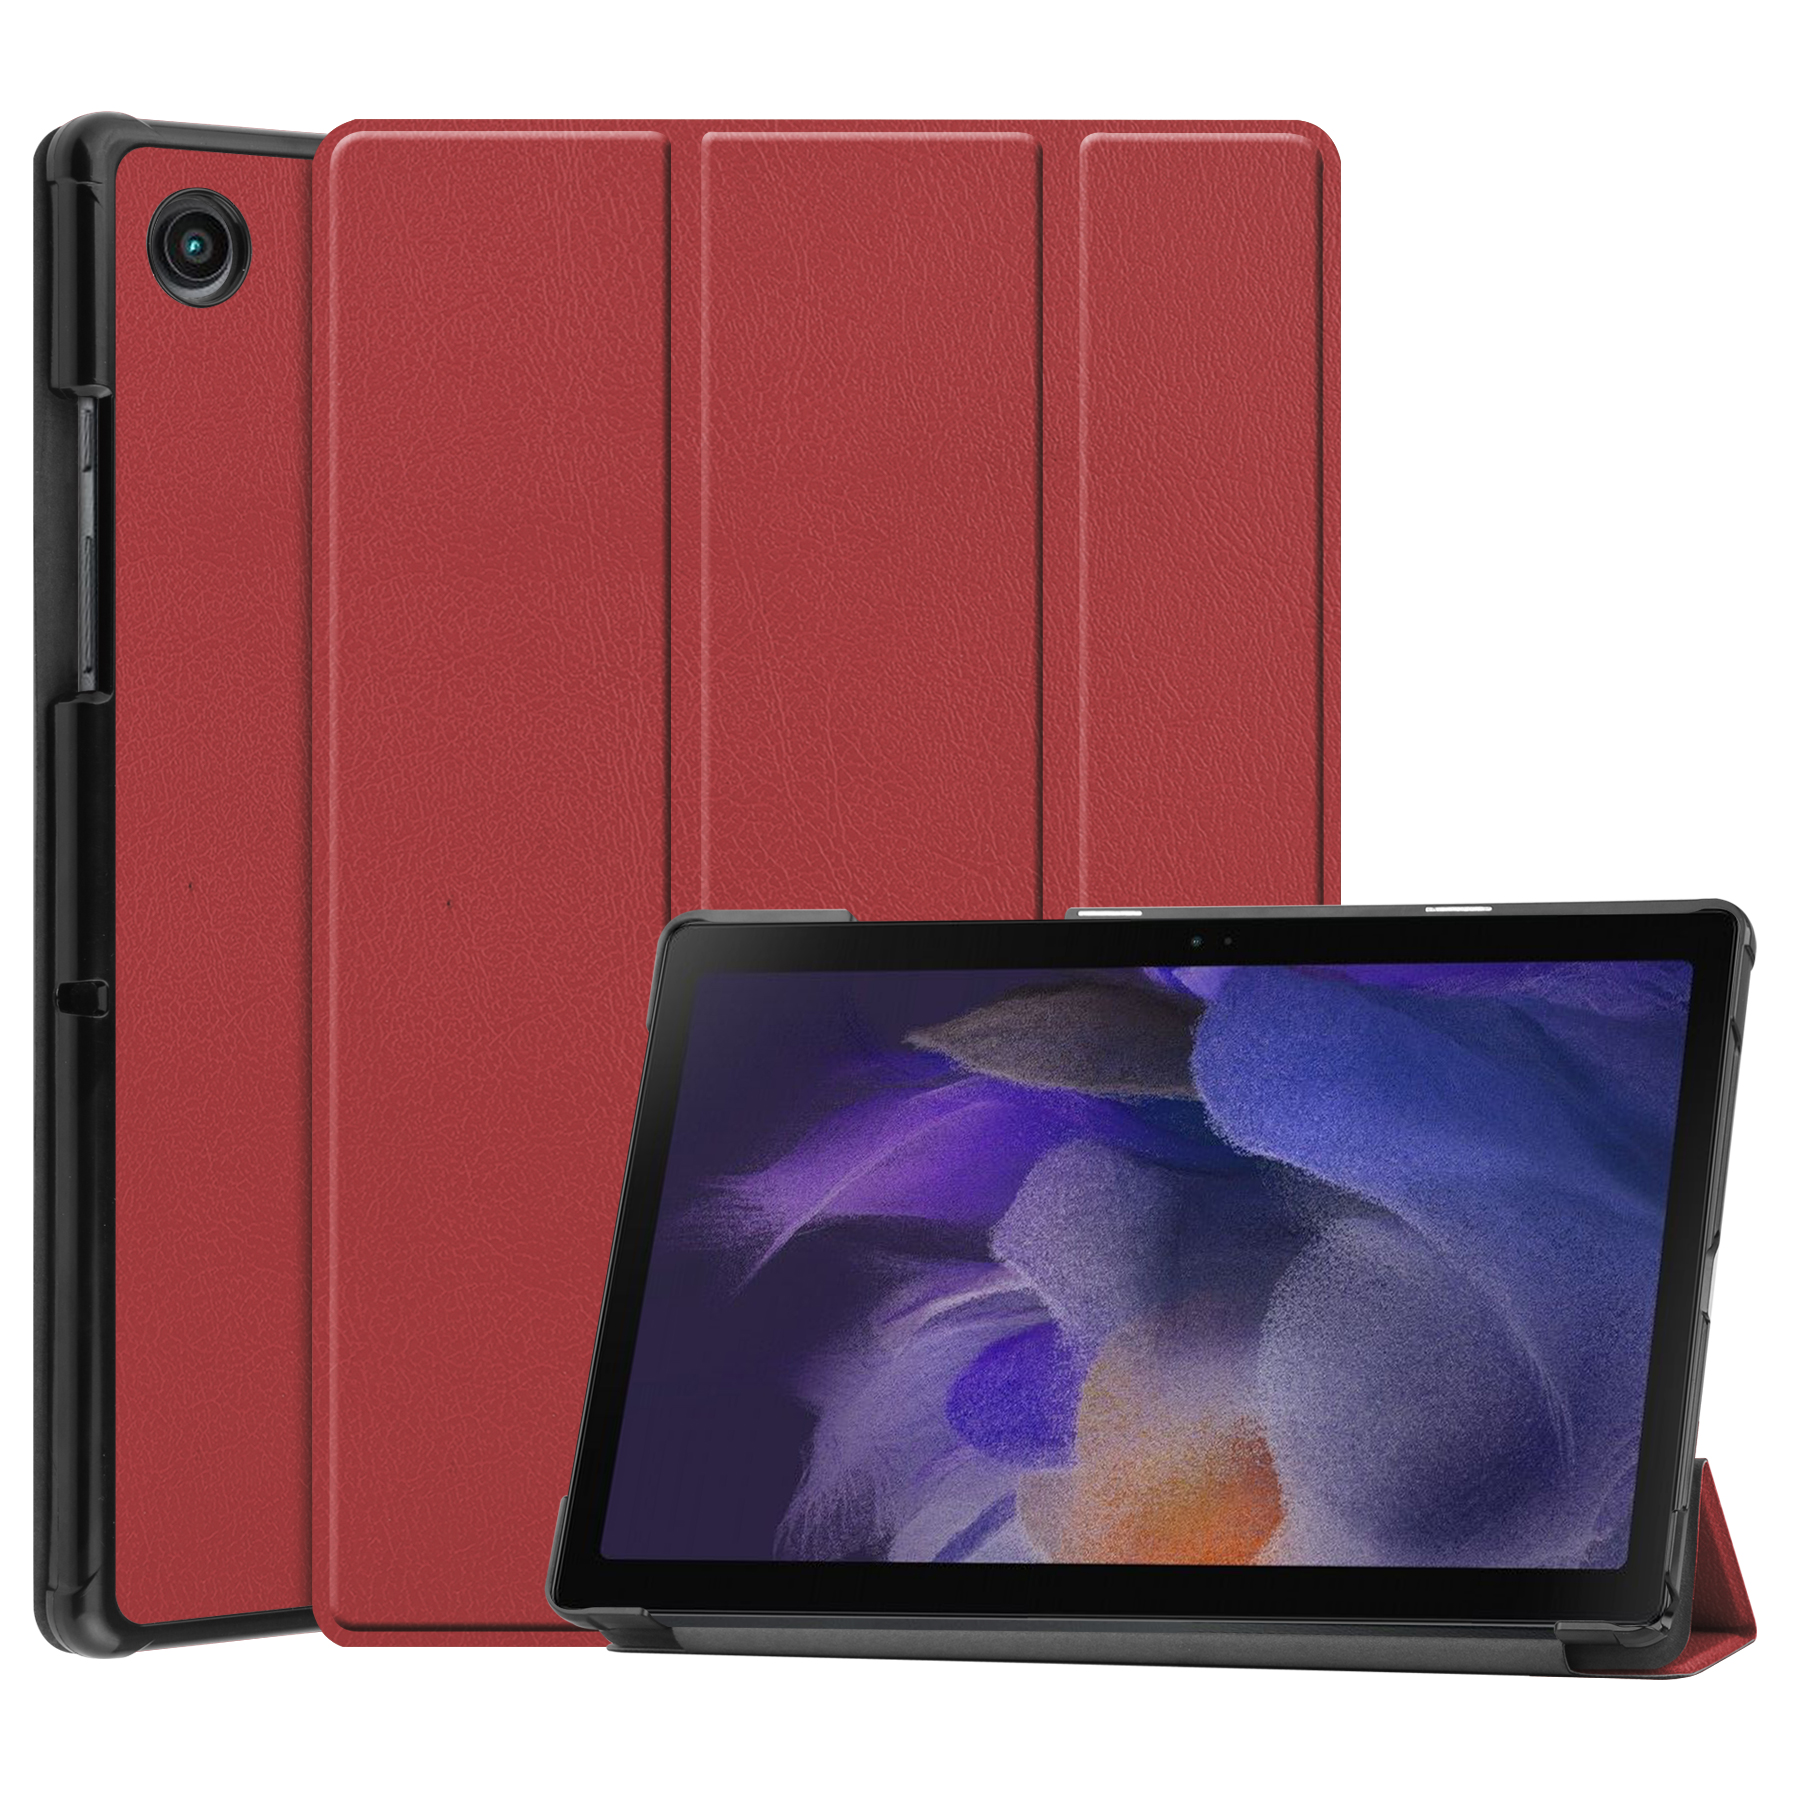 logboek petticoat Inactief Case2go Tablet hoes voor Samsung Galaxy Tab A8 (2022 & 2021) tri-fold hoes  met auto/wake functie - 10.5 inch - Donker Rood | Case2go.nl